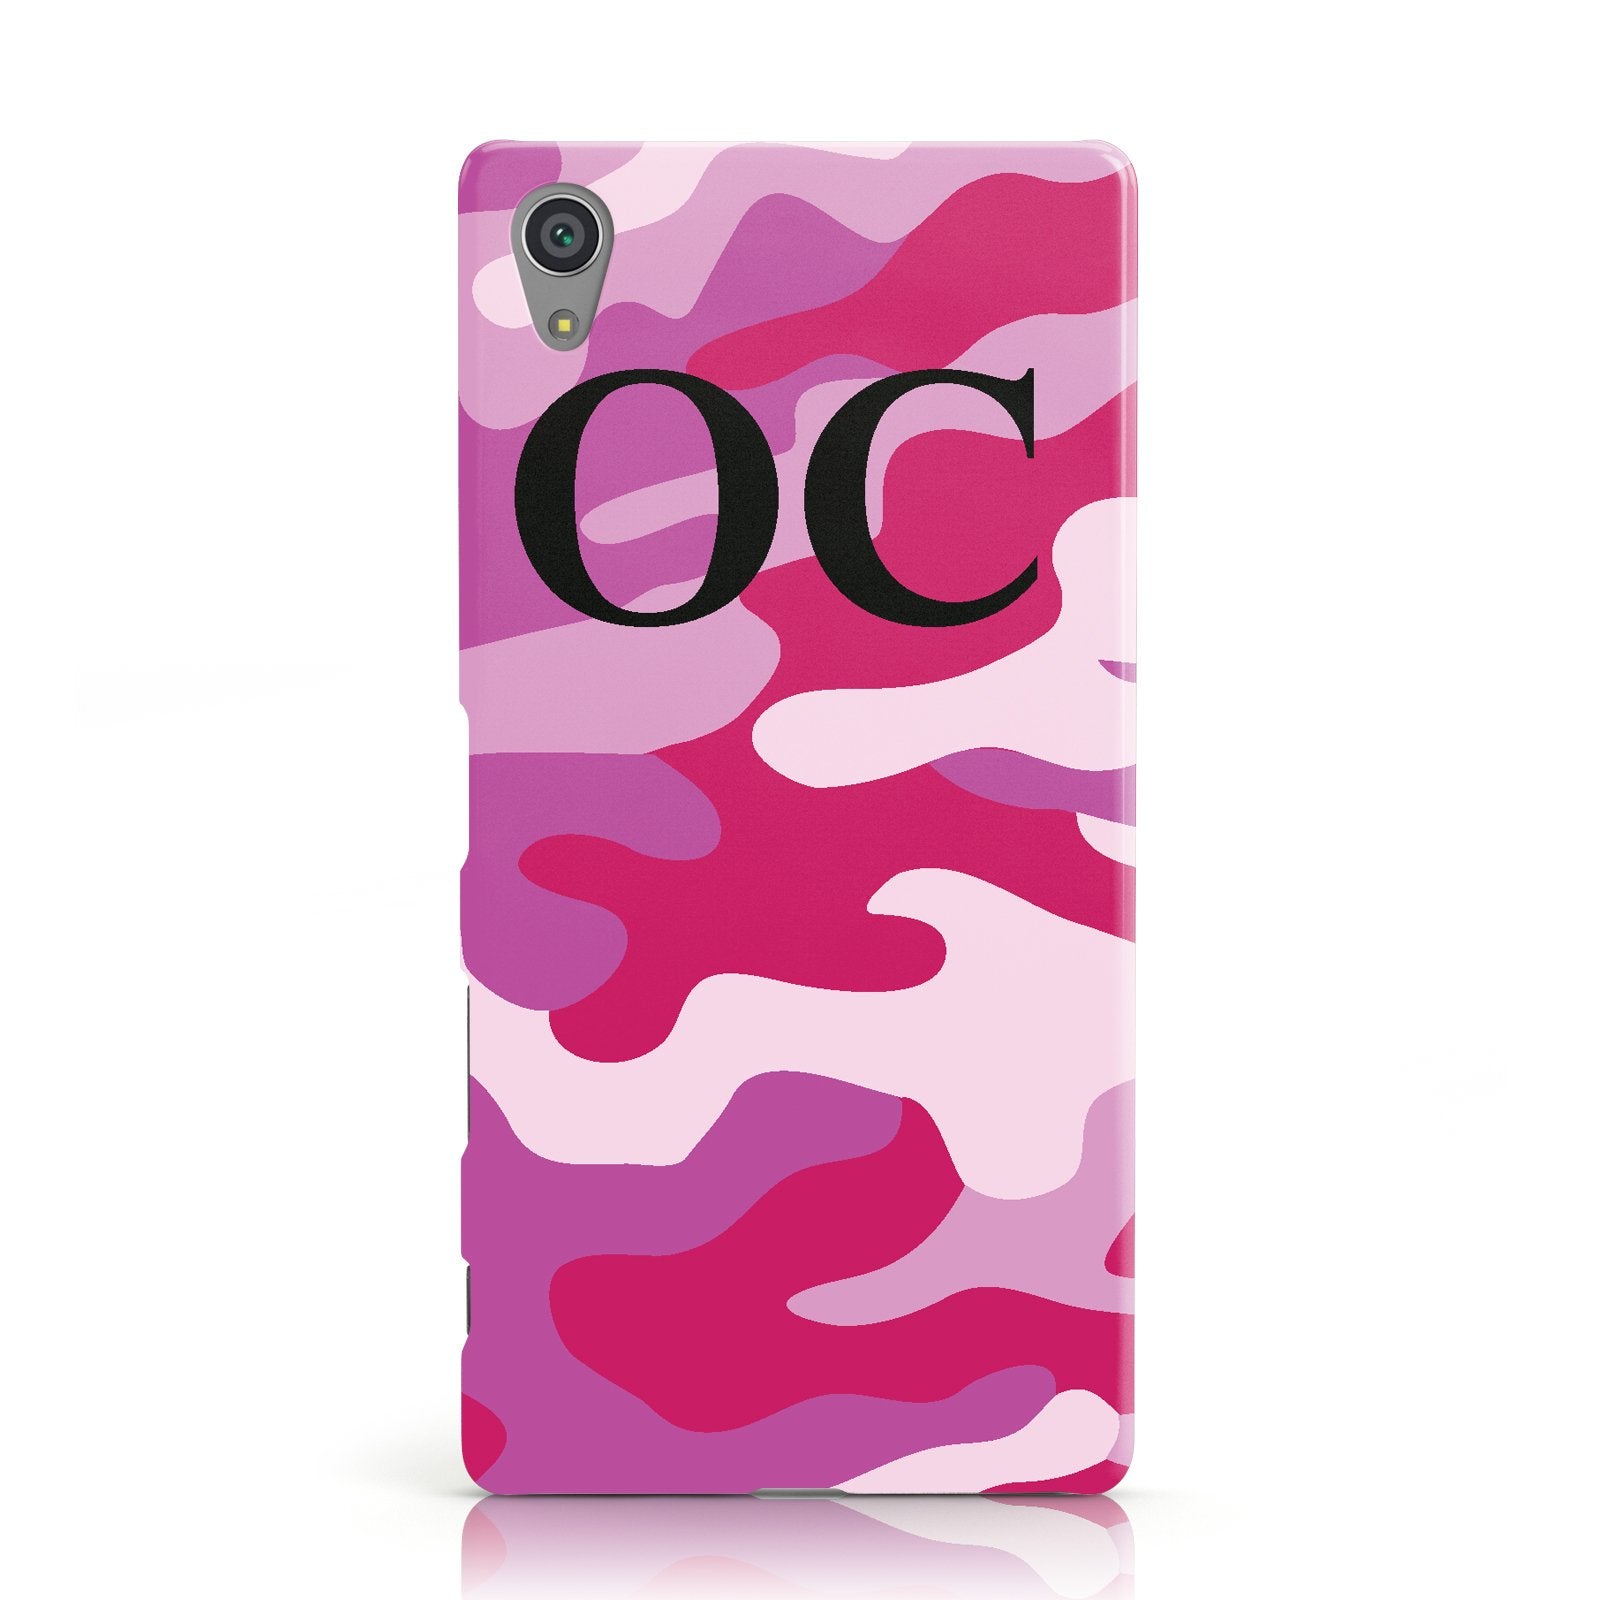 Camouflage Personalised Sony Xperia Case